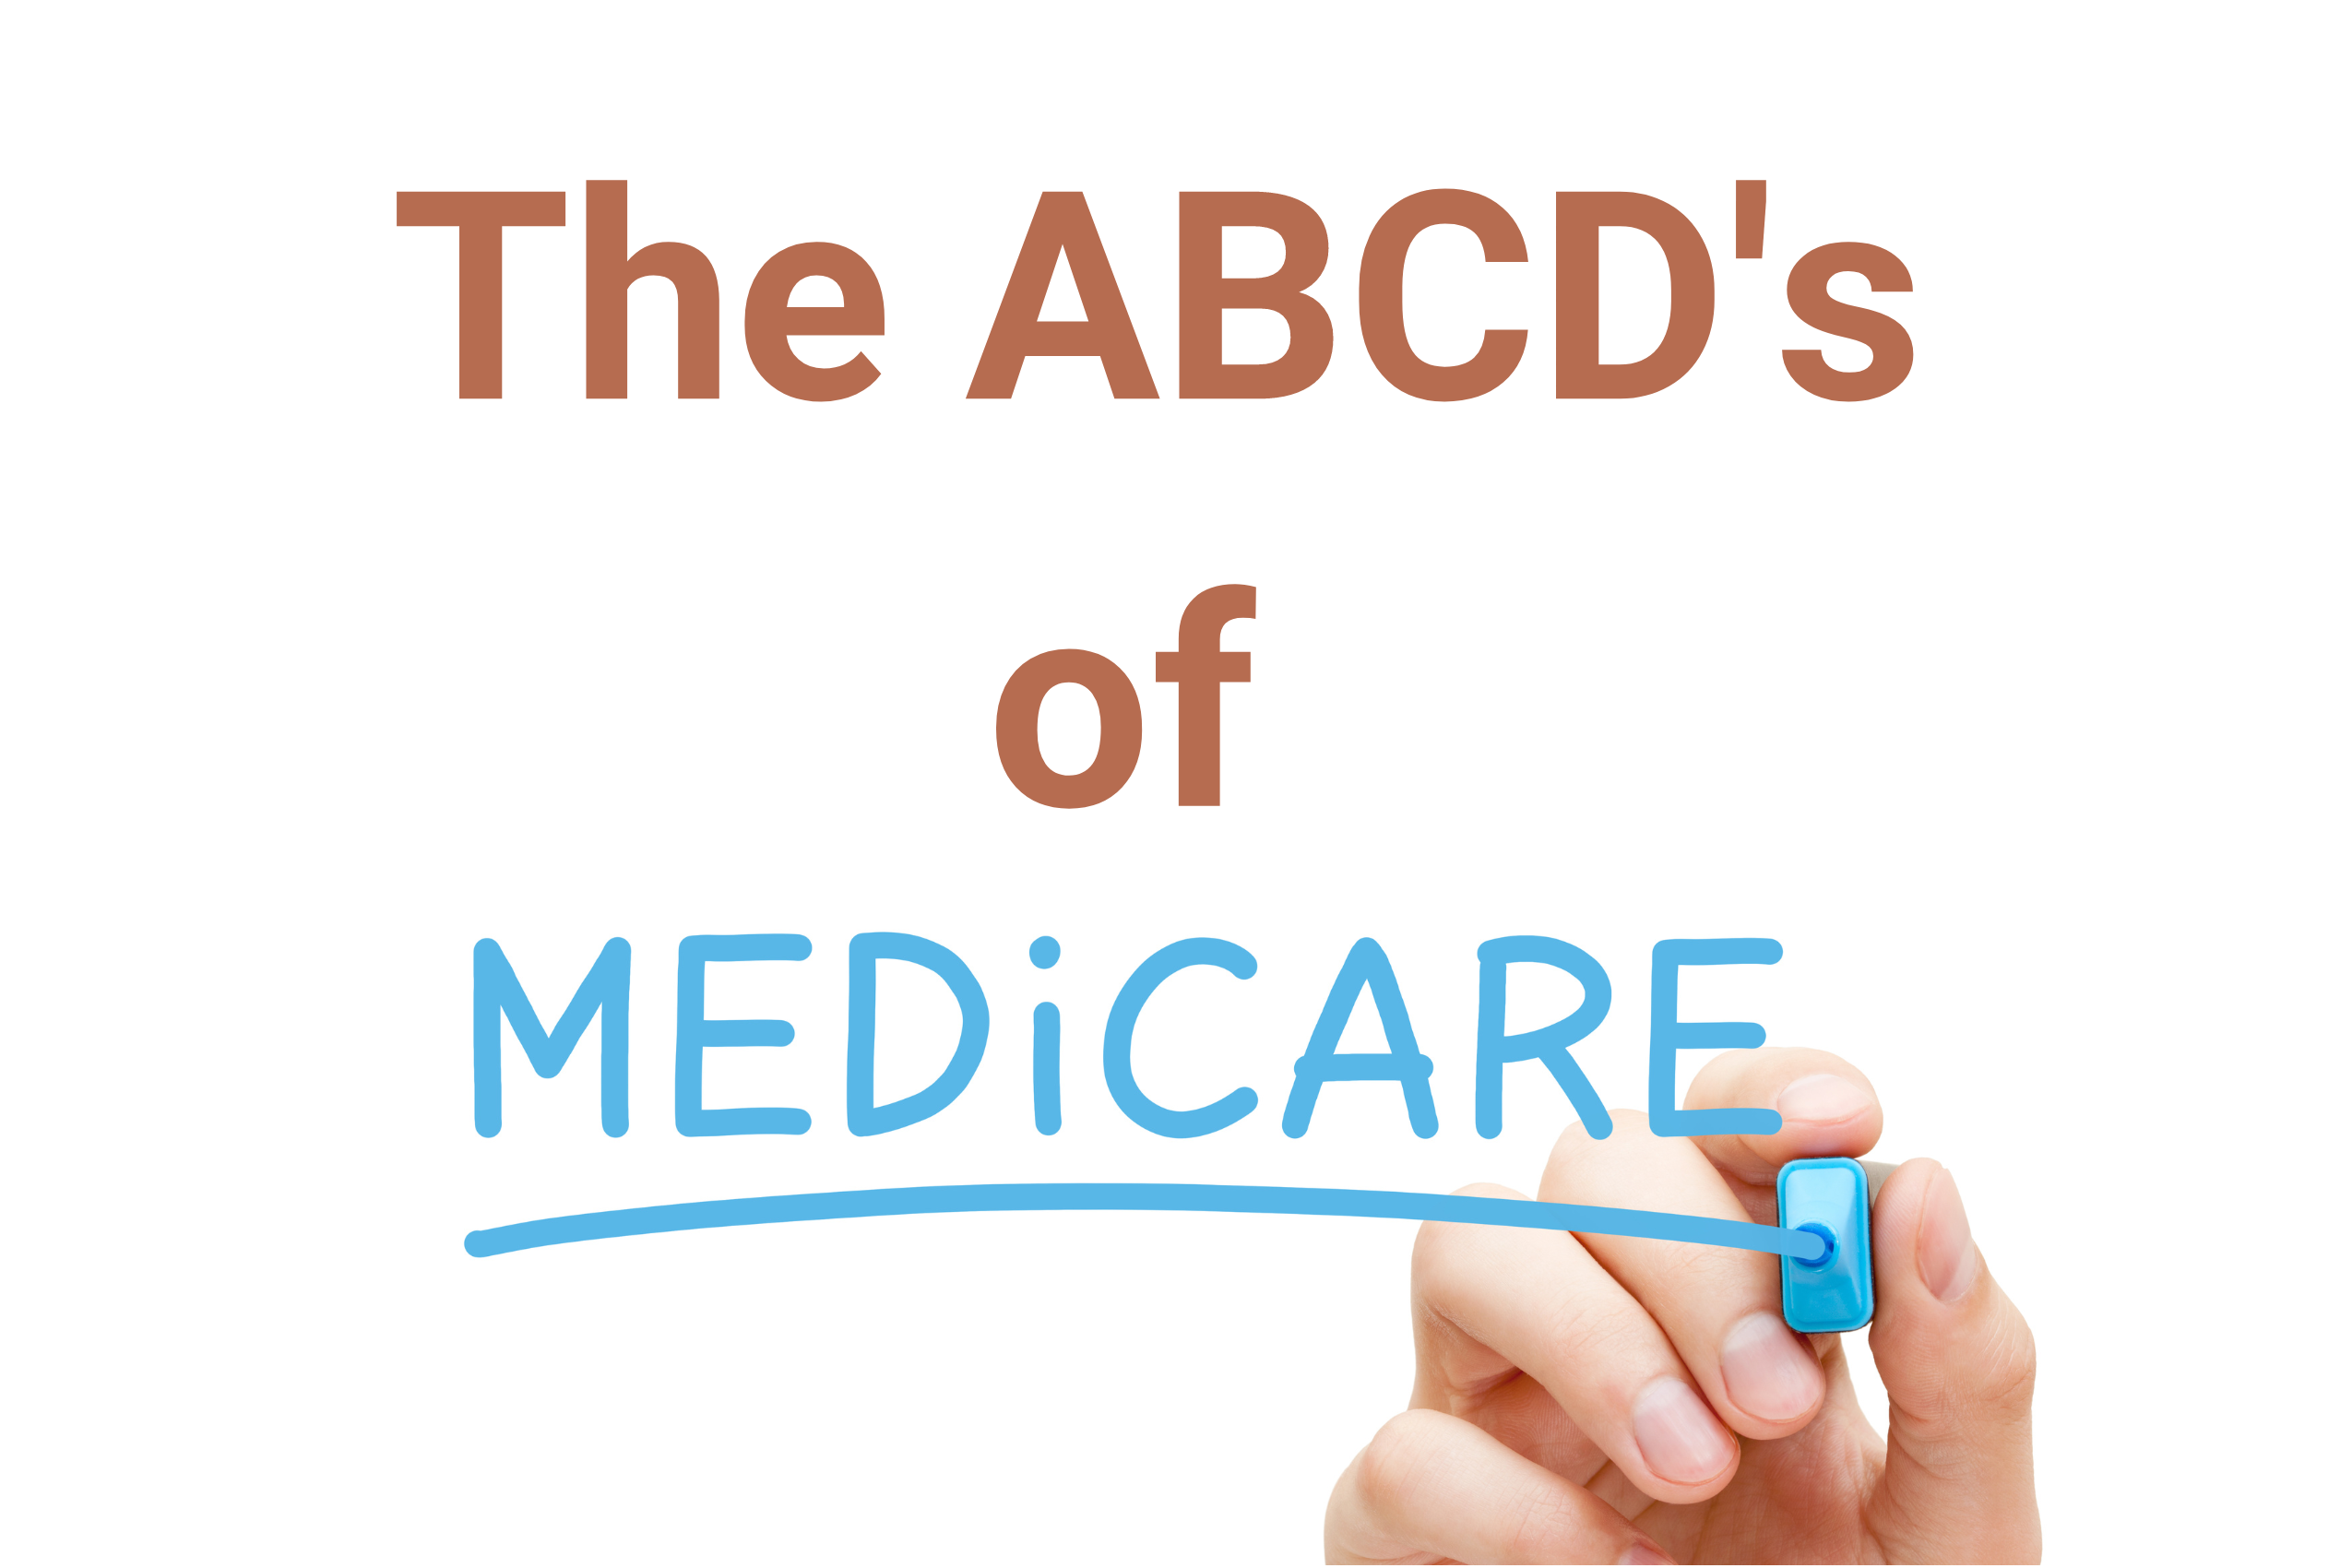 The ABCD's of Medicare